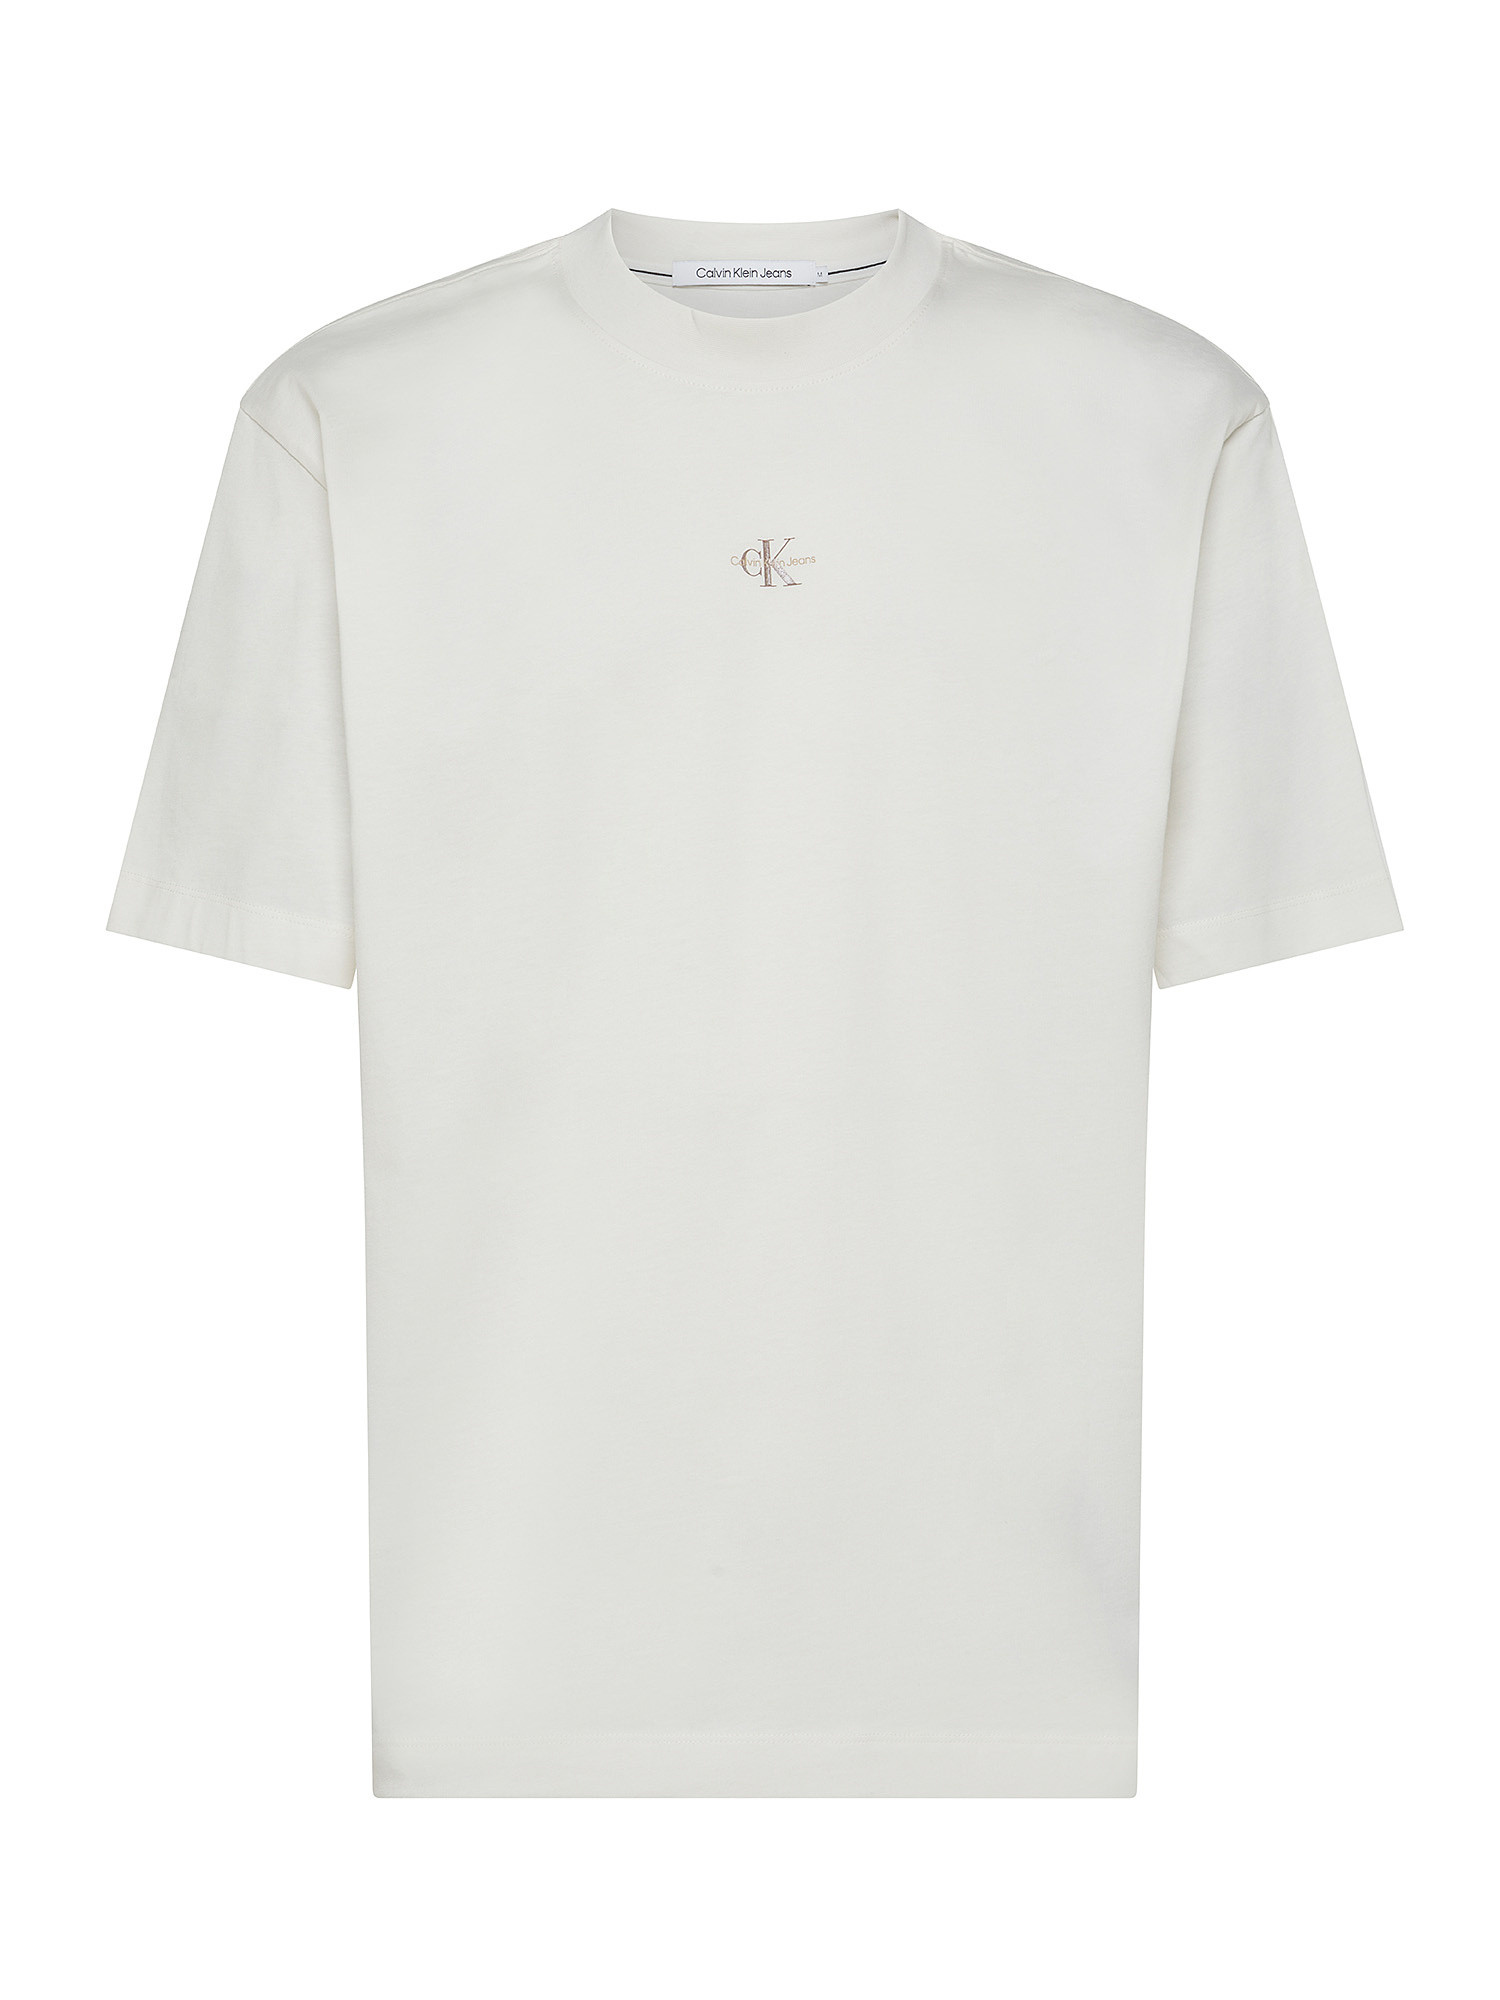 Calvin Klein Jeans - T-shirt relaxed fit in cotone biologico con logo, Bianco, large image number 0